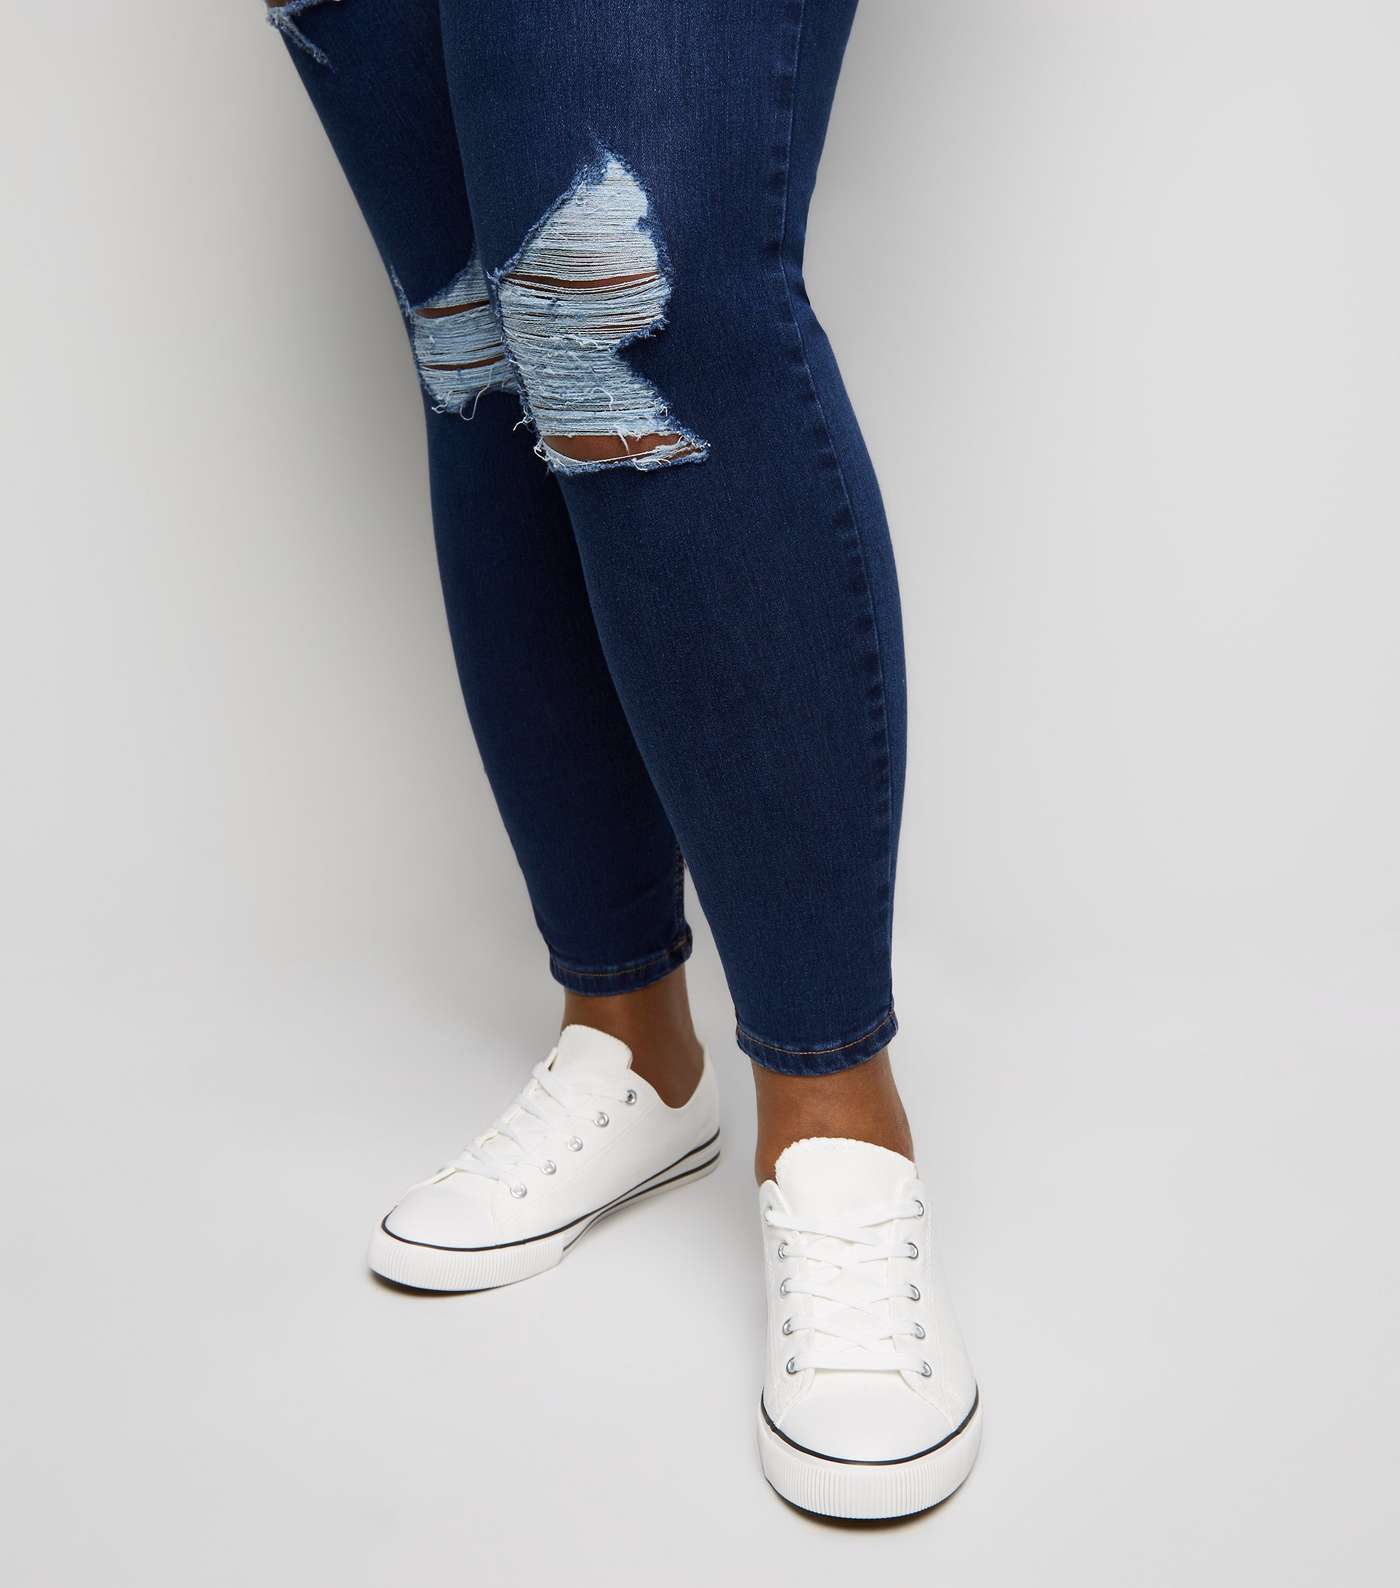 Curves Blue Ripped High Waist Super Skinny Jeans Image 5